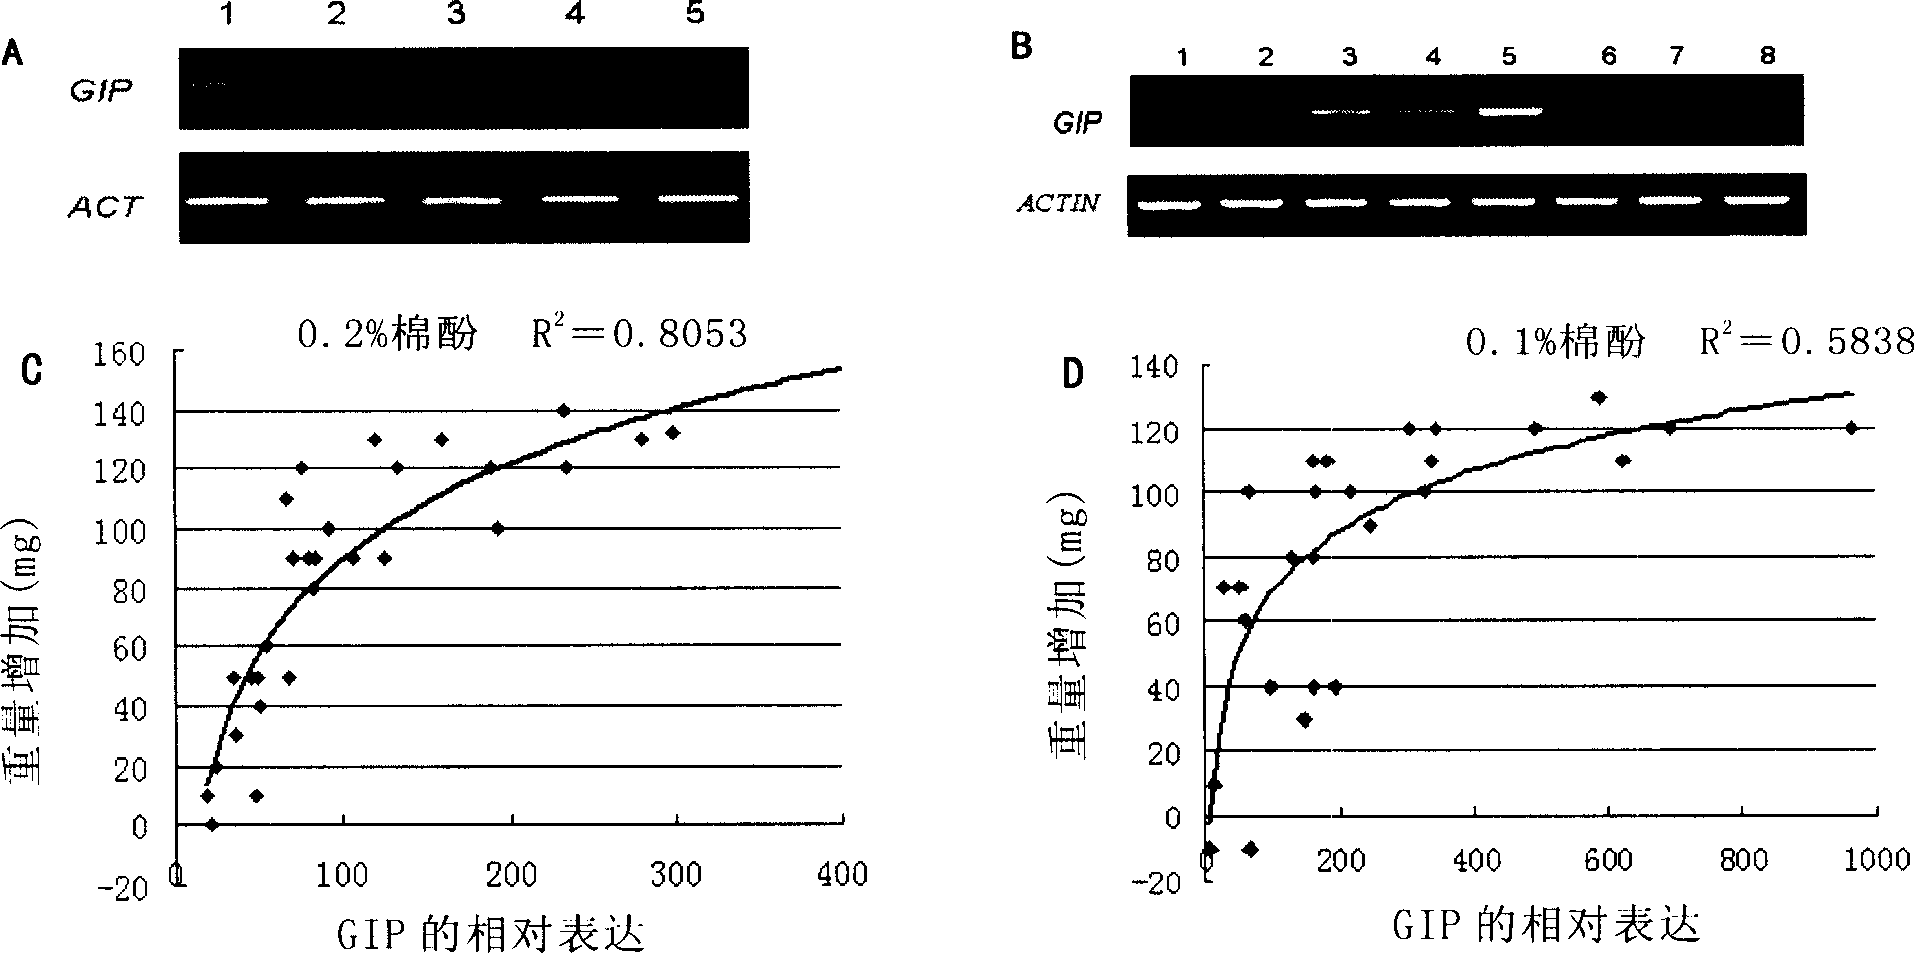 Method for improving insect resistance of plant by using RNAi technique